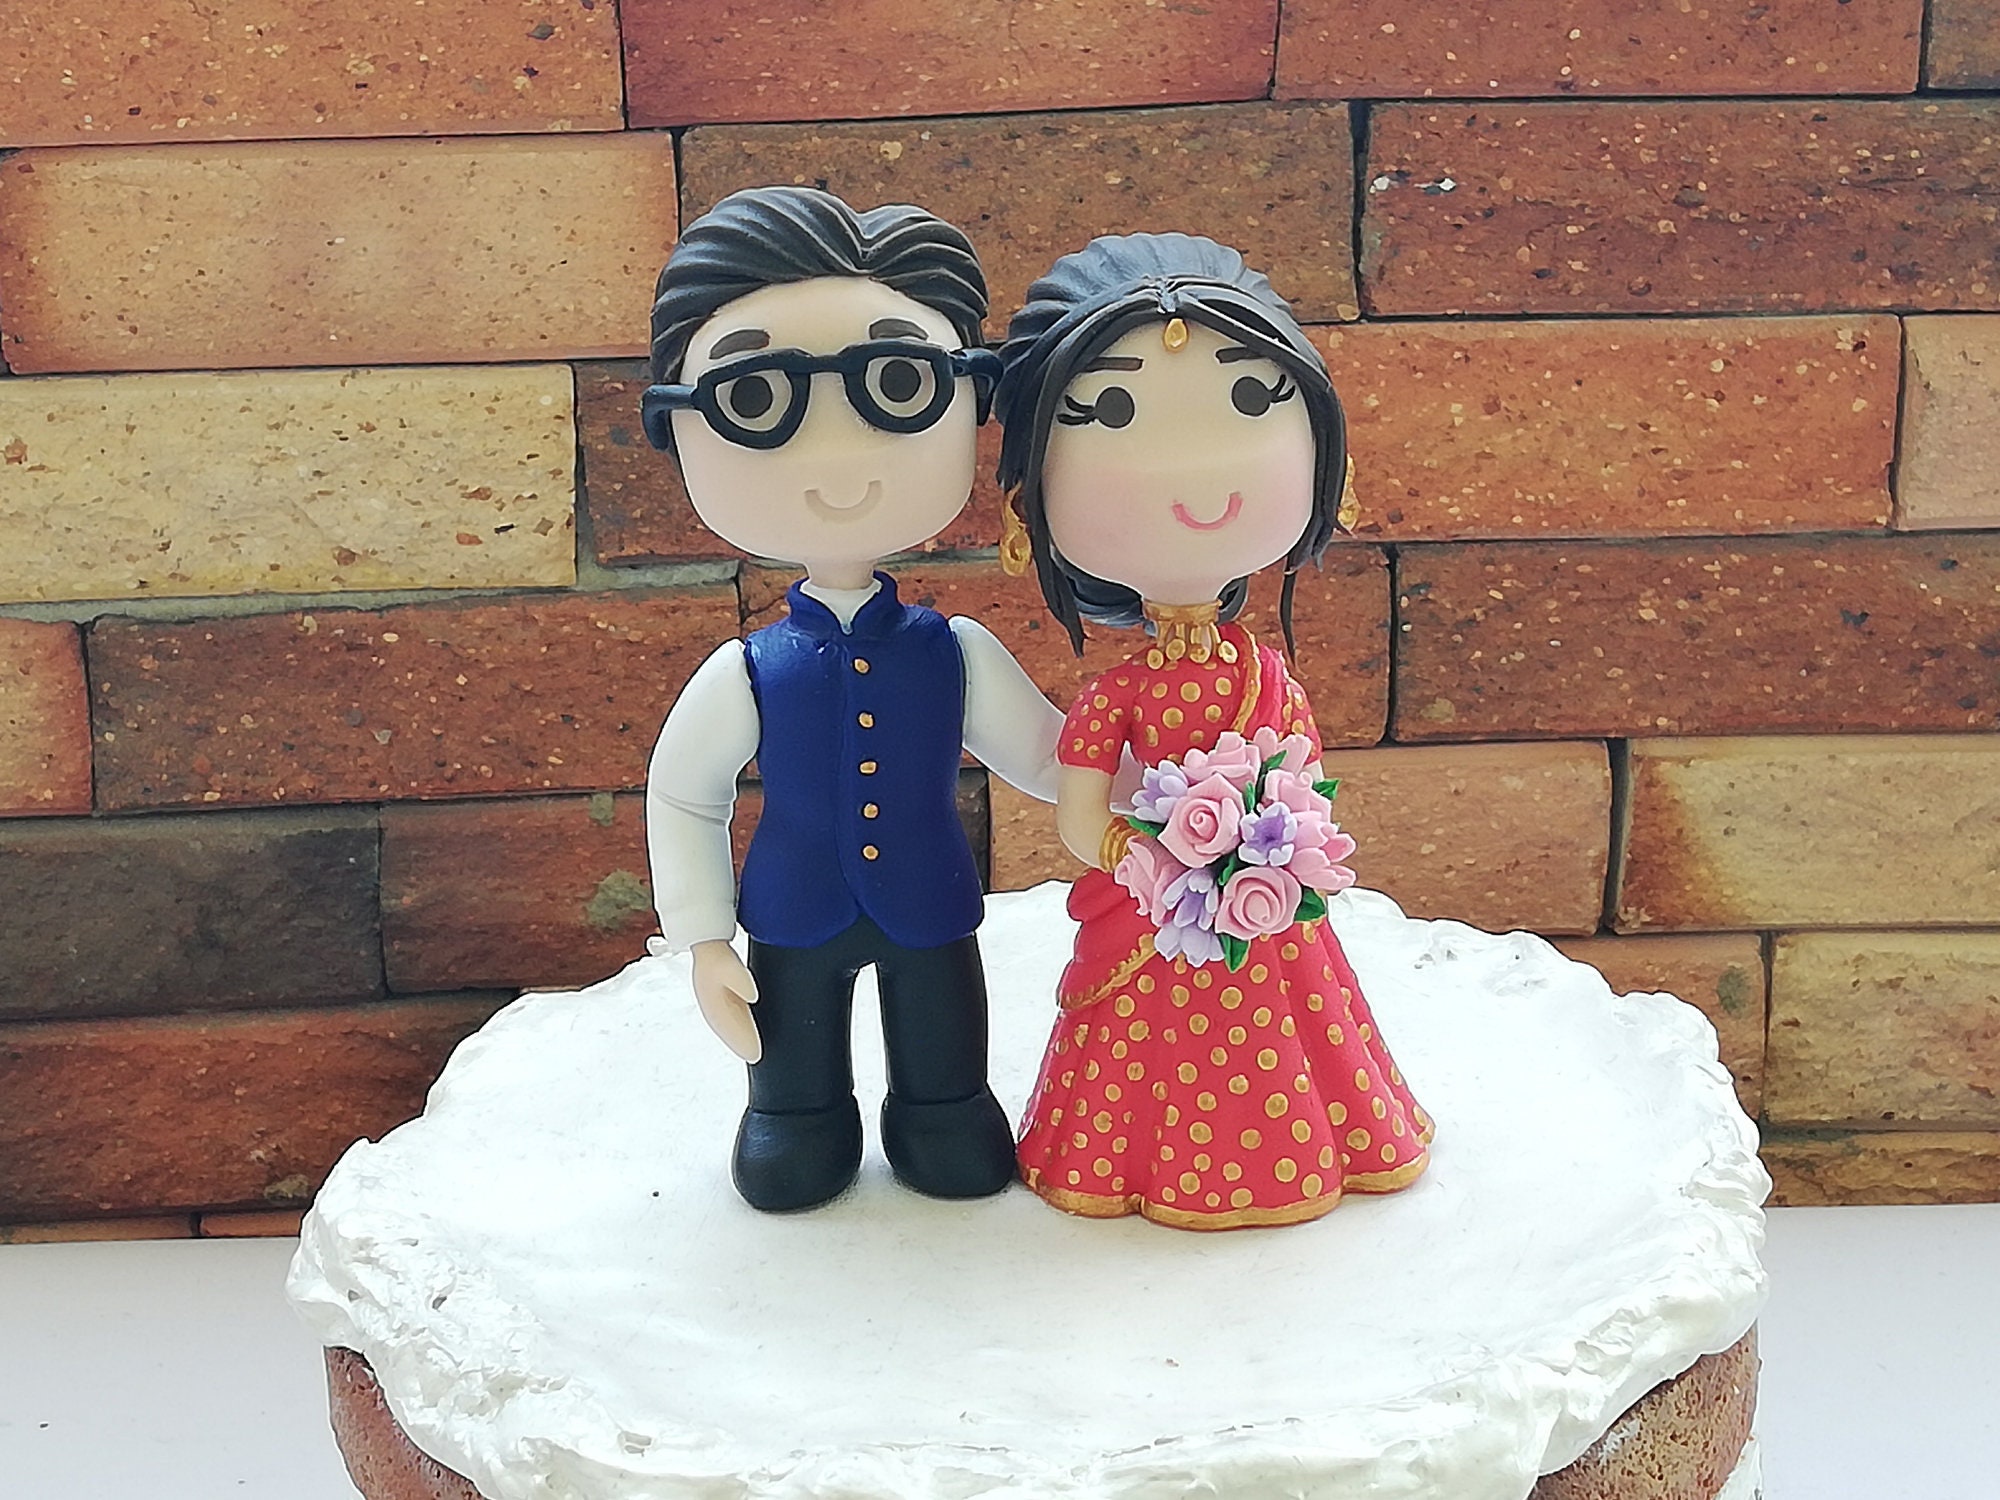 Cutesy Indian Wedding Cake Designs to Add a 'Desi' Touch to Your  Celebration | Wedding Planning and Ideas | Wedding Blog